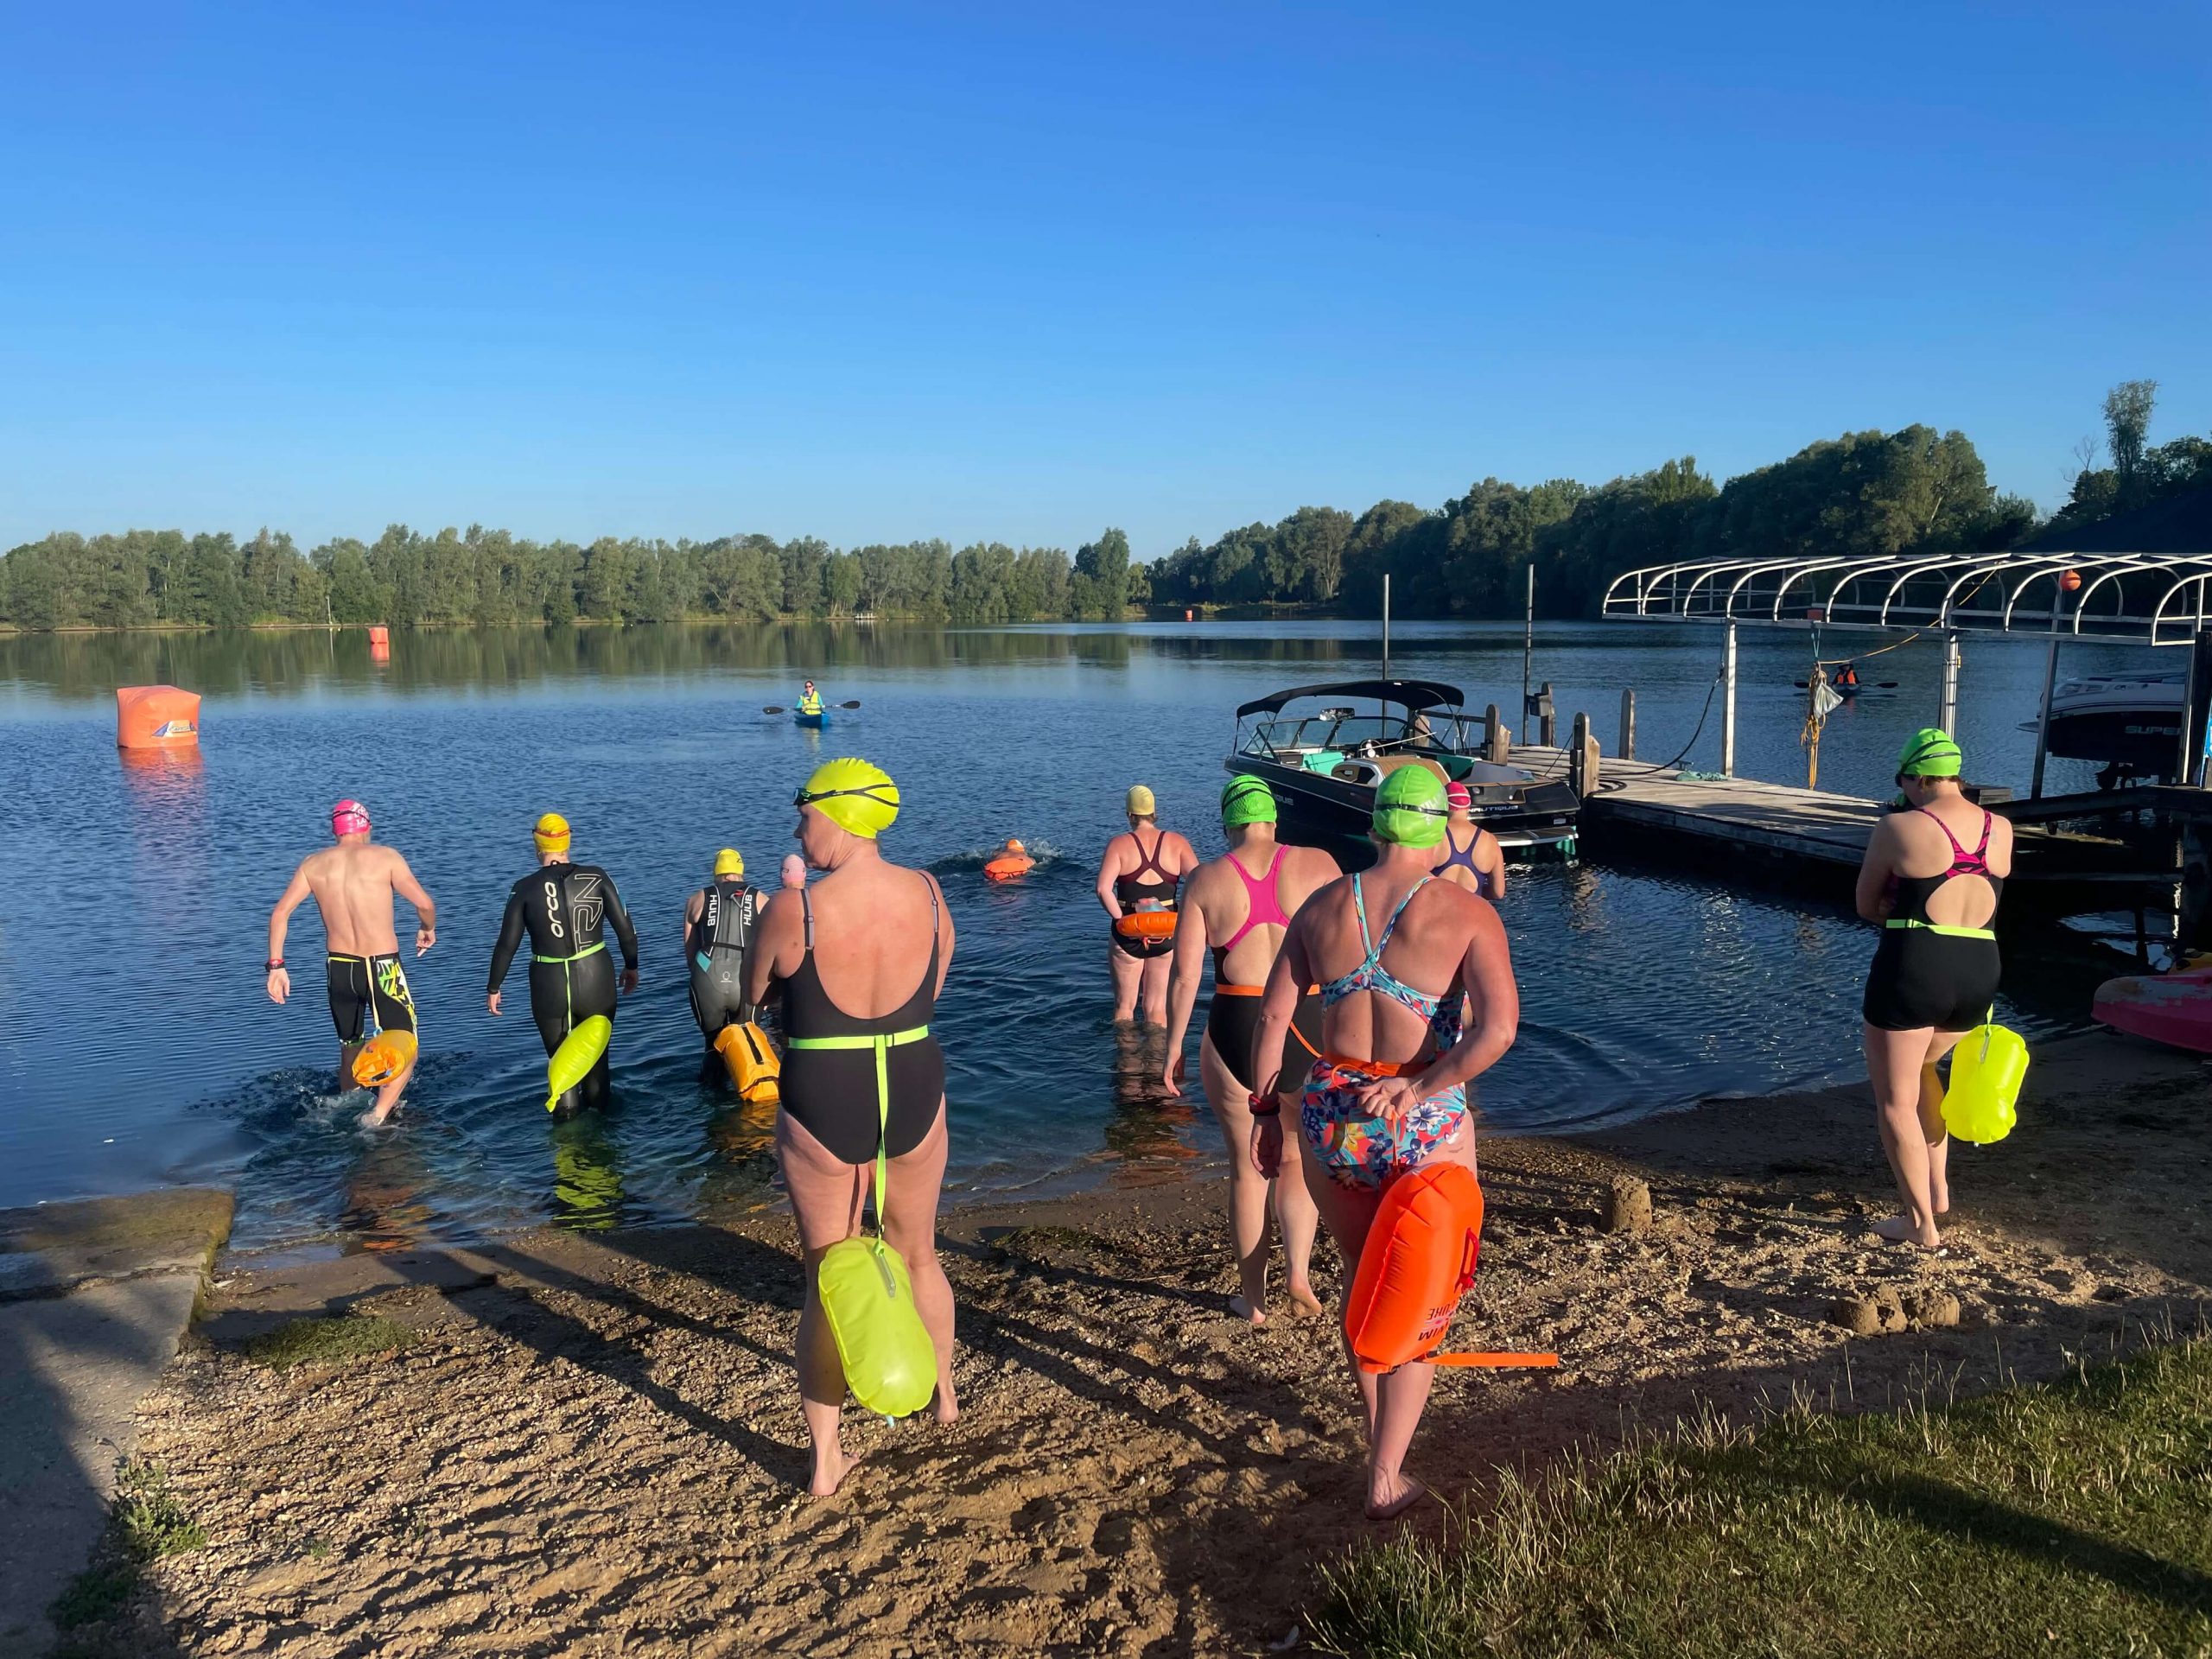 Diary of an open water swimmer - Wild about swimming and Great